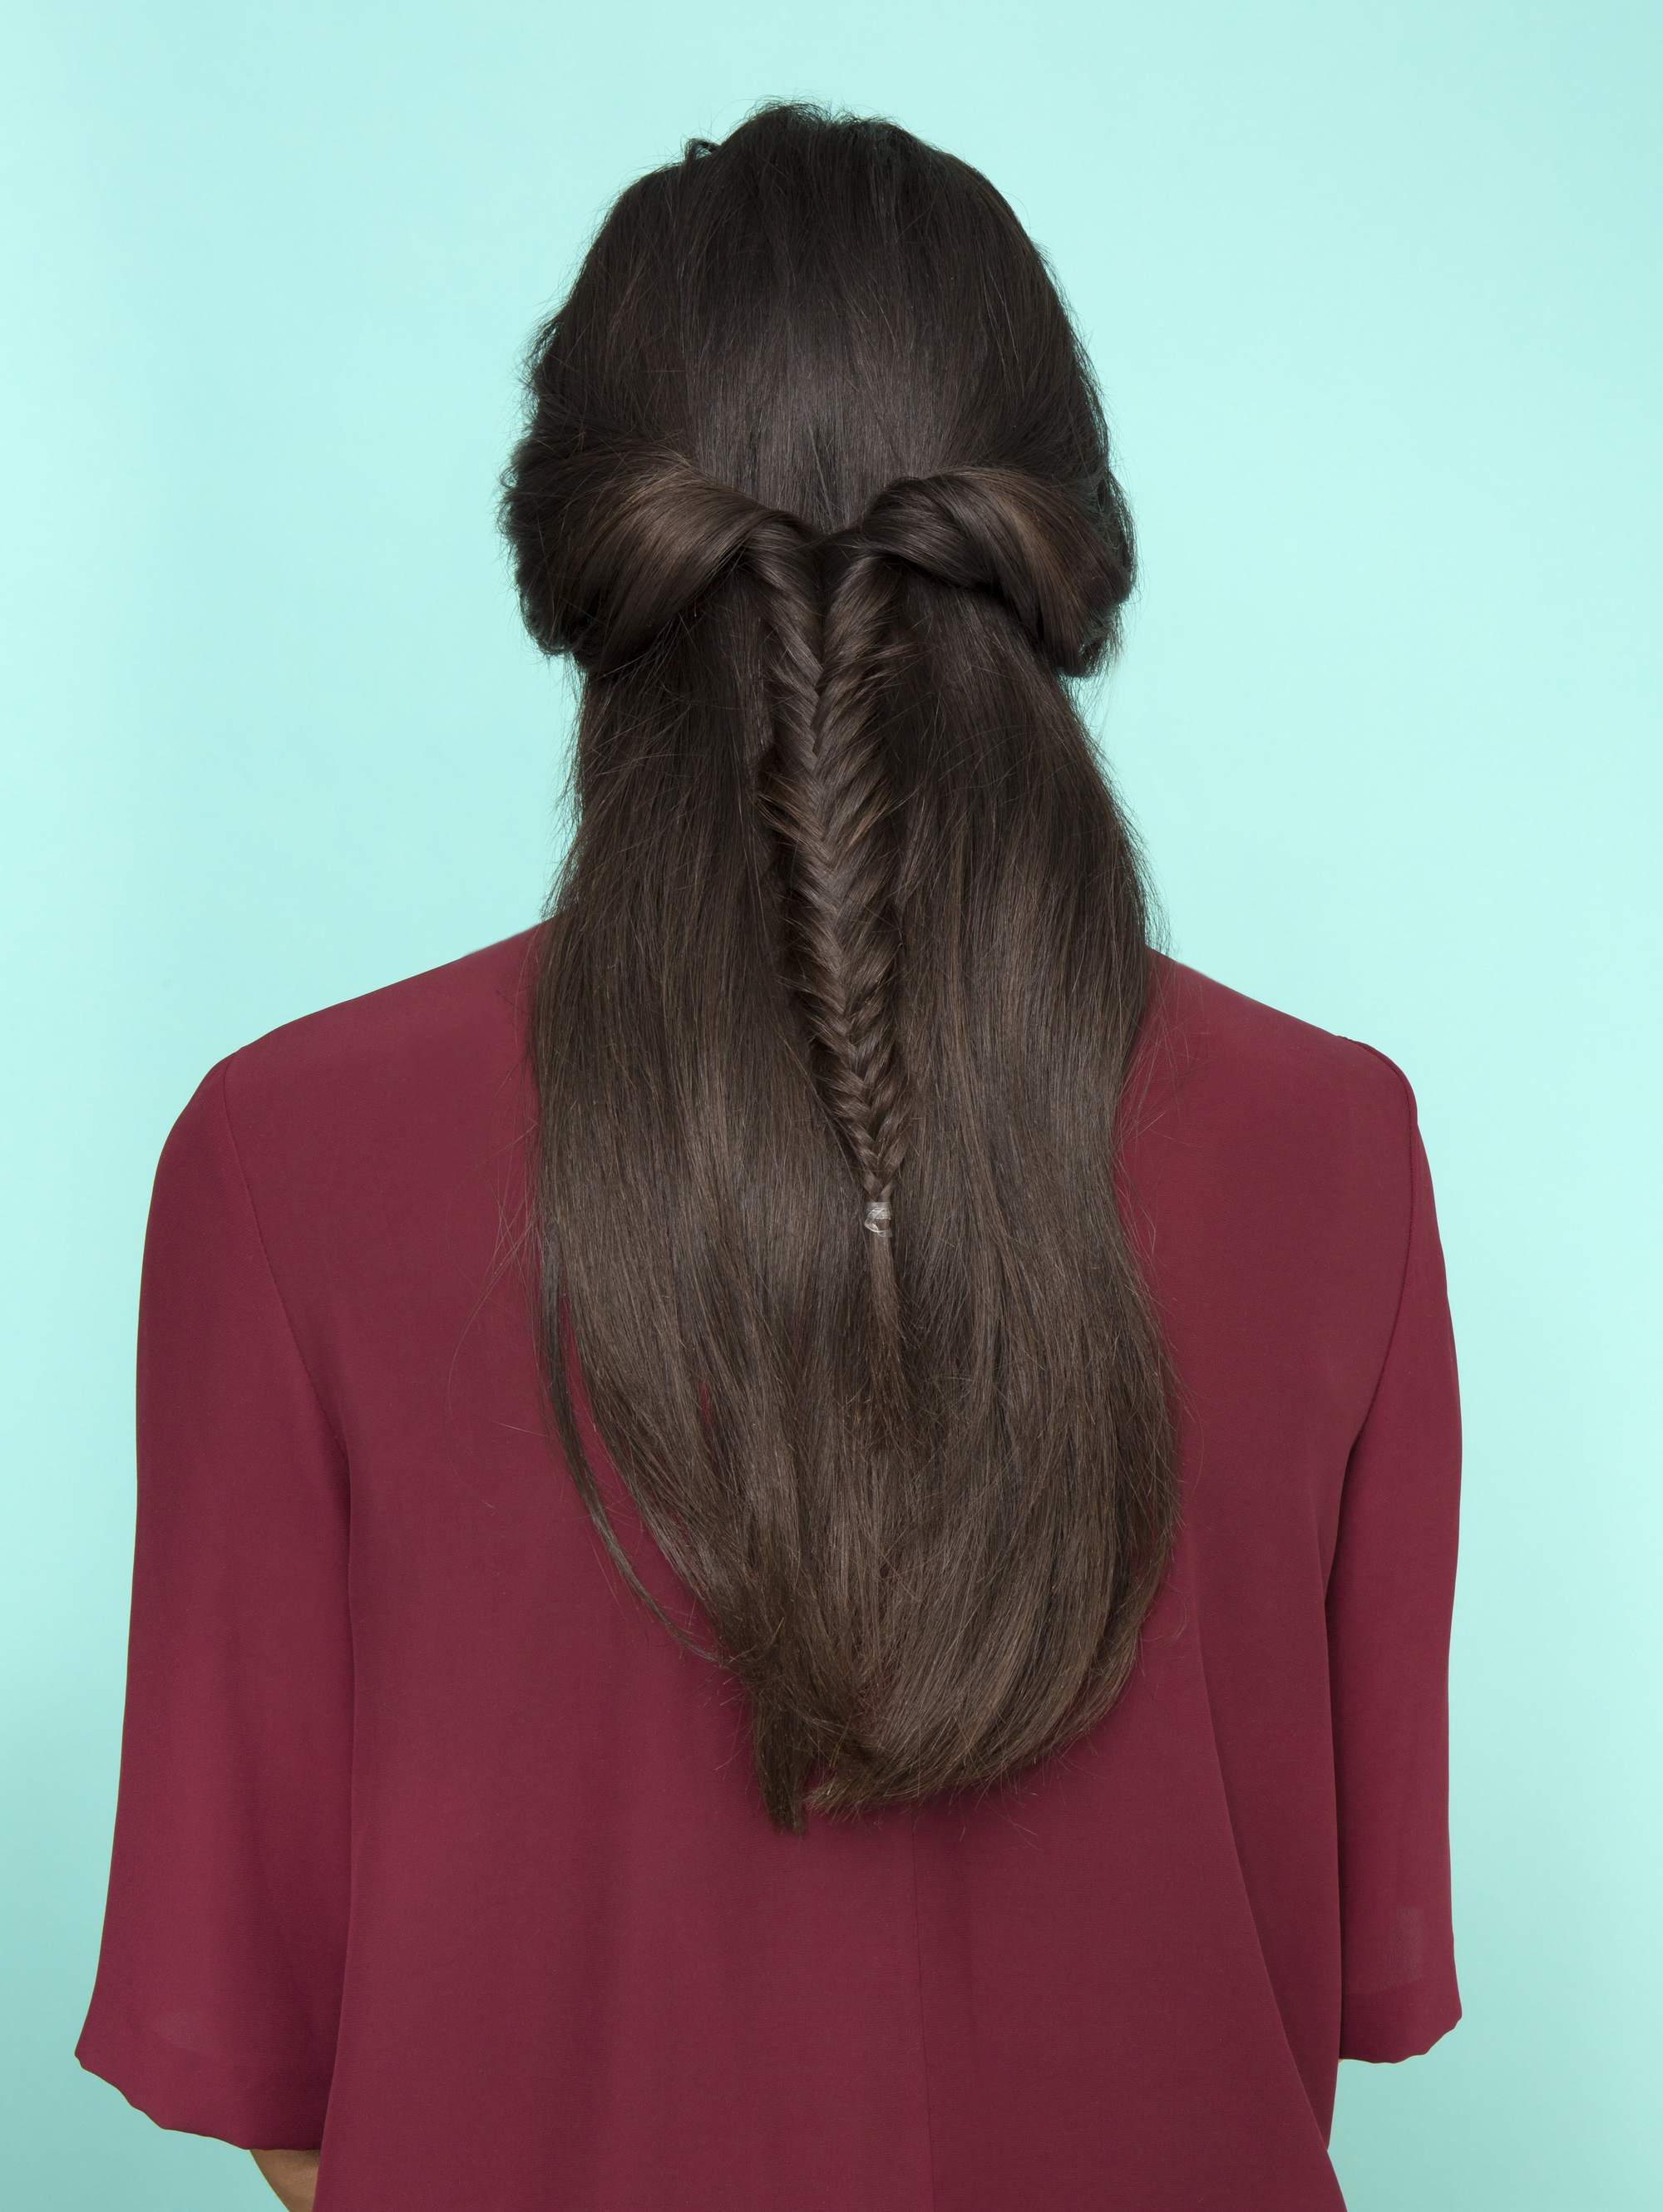 Diwali hairstyles: Back view of a woman with long straight dark brown hair in a half-up fishtail braid